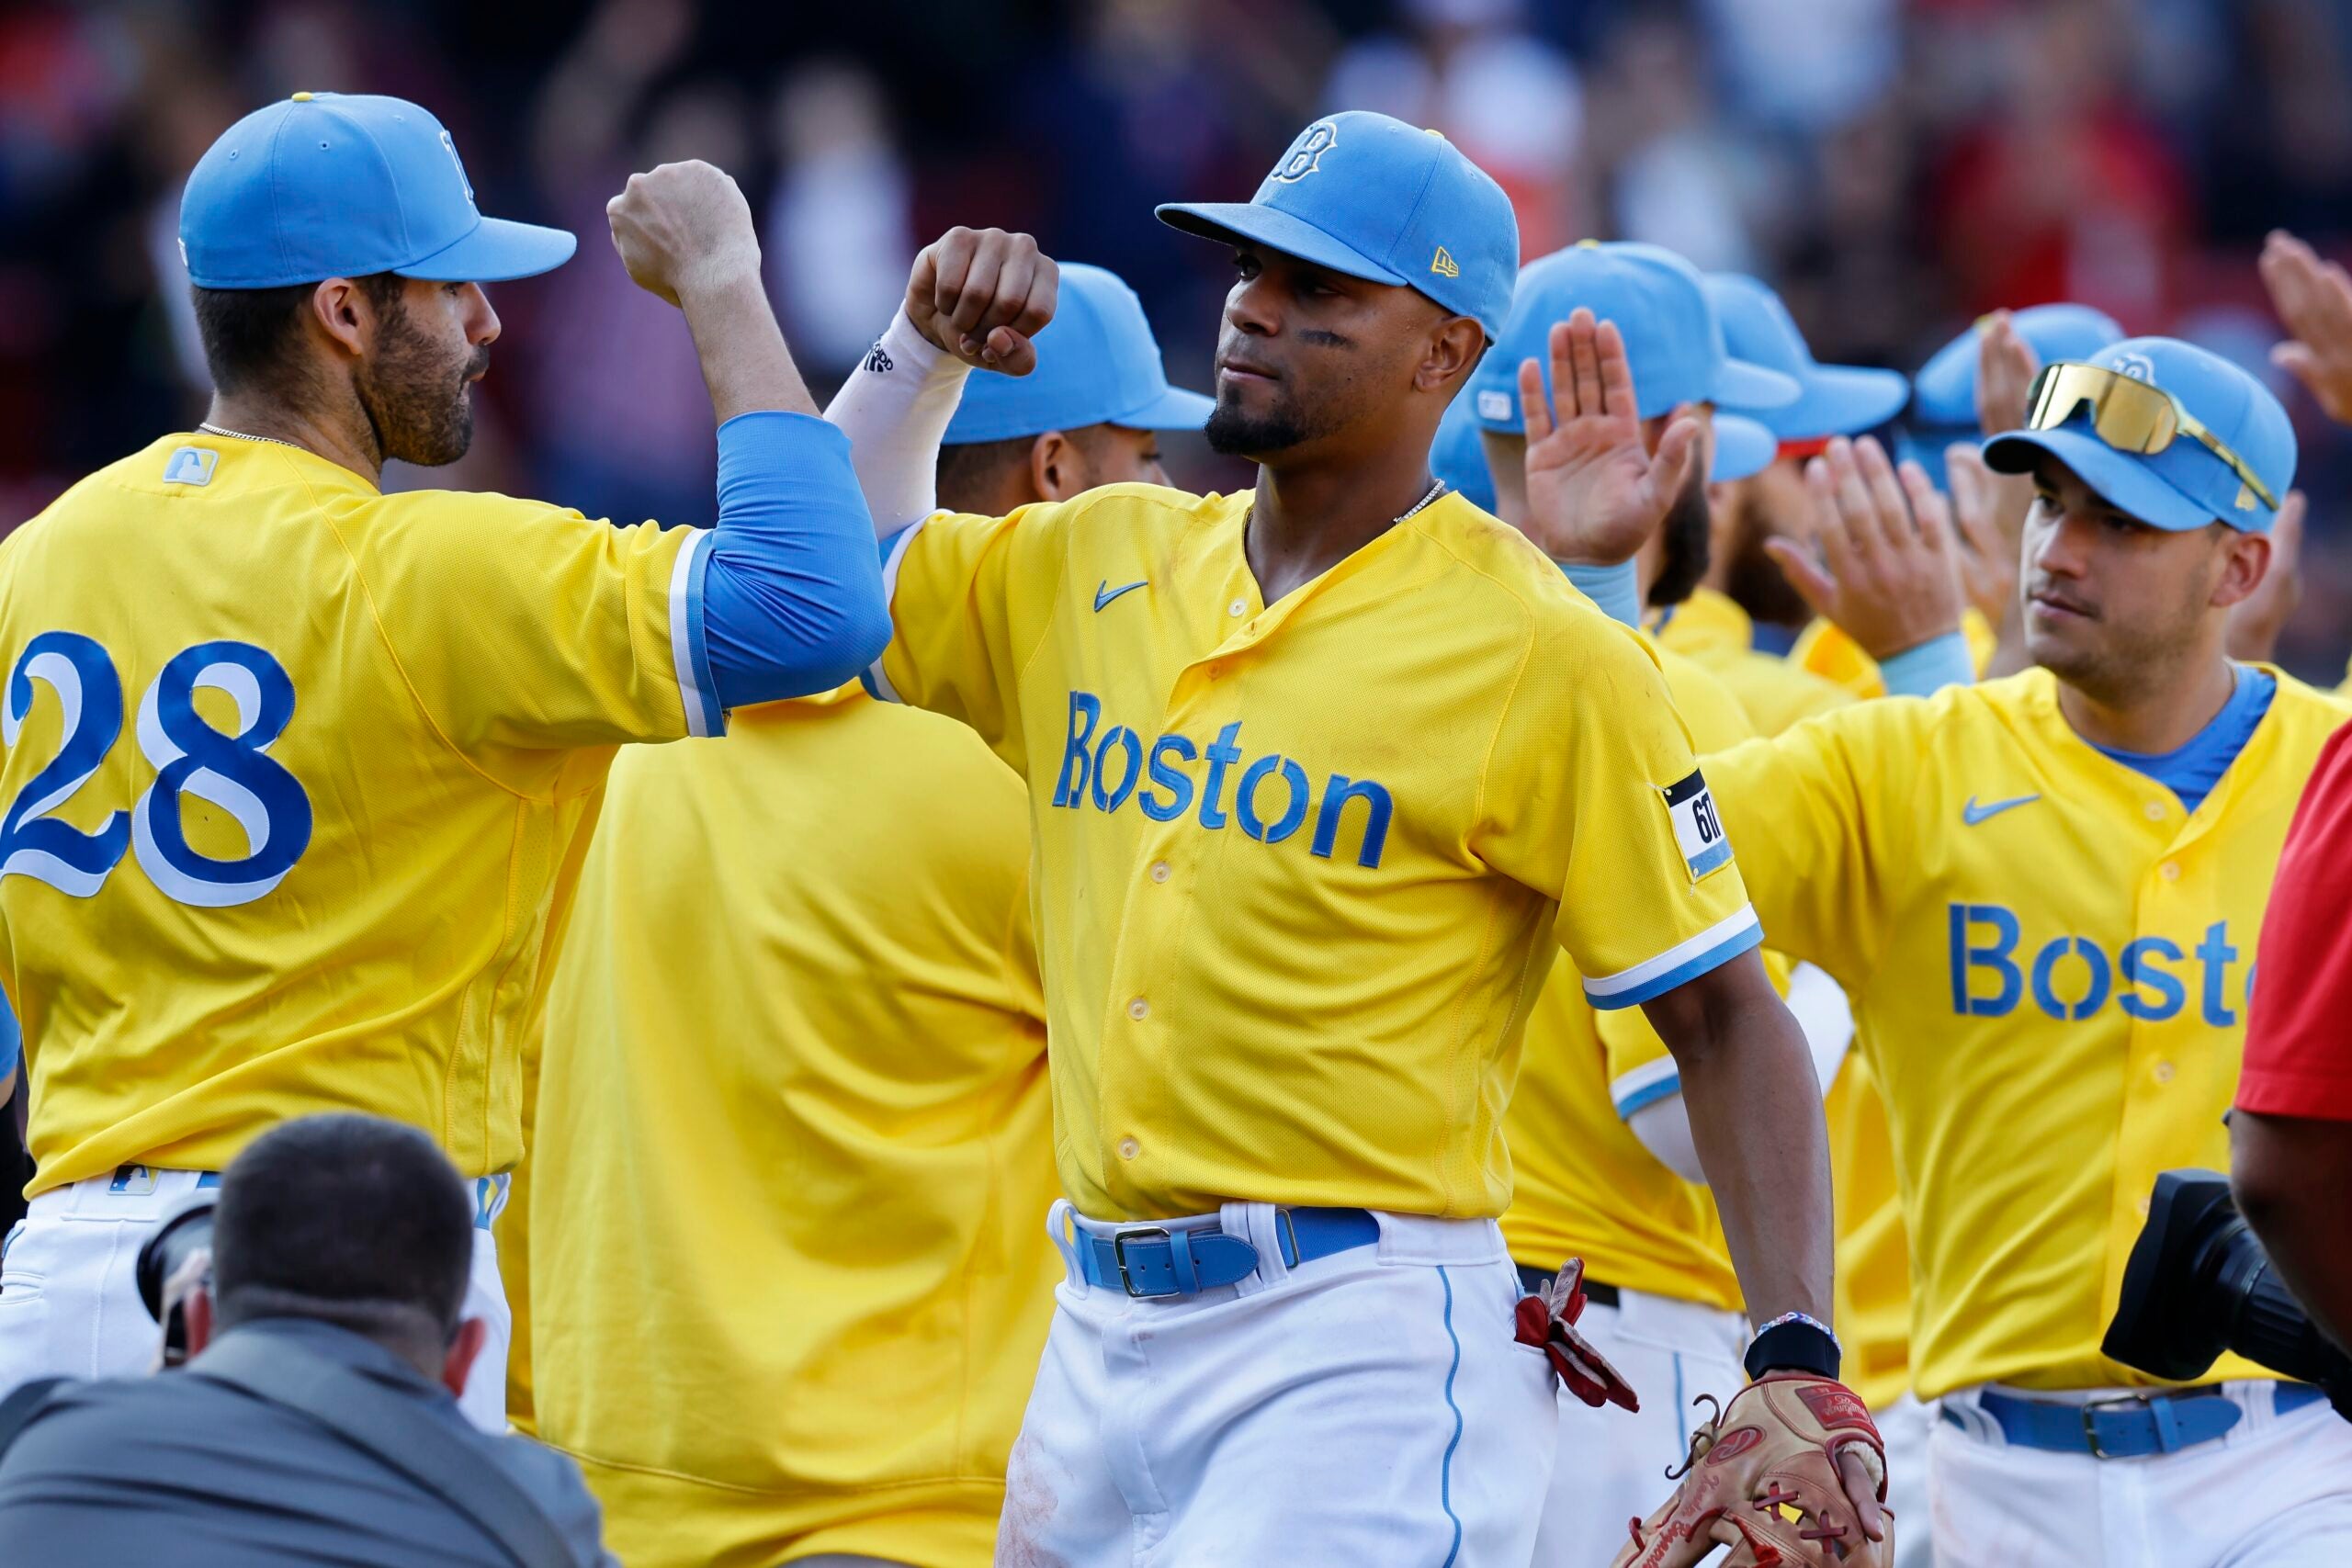 Red Sox Wearing Yellow and Blue The New Uniforms Meaning Explained!